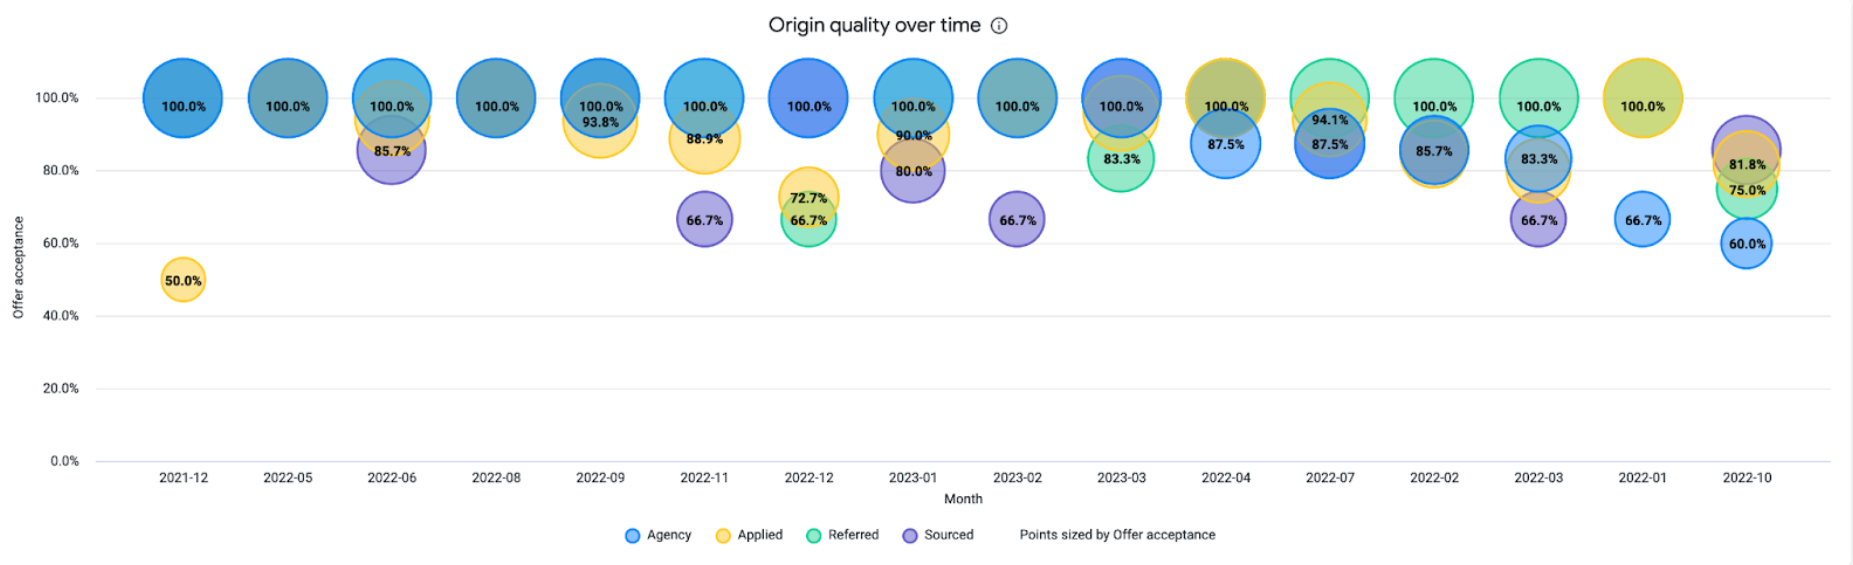 Offer origin quality over time chart